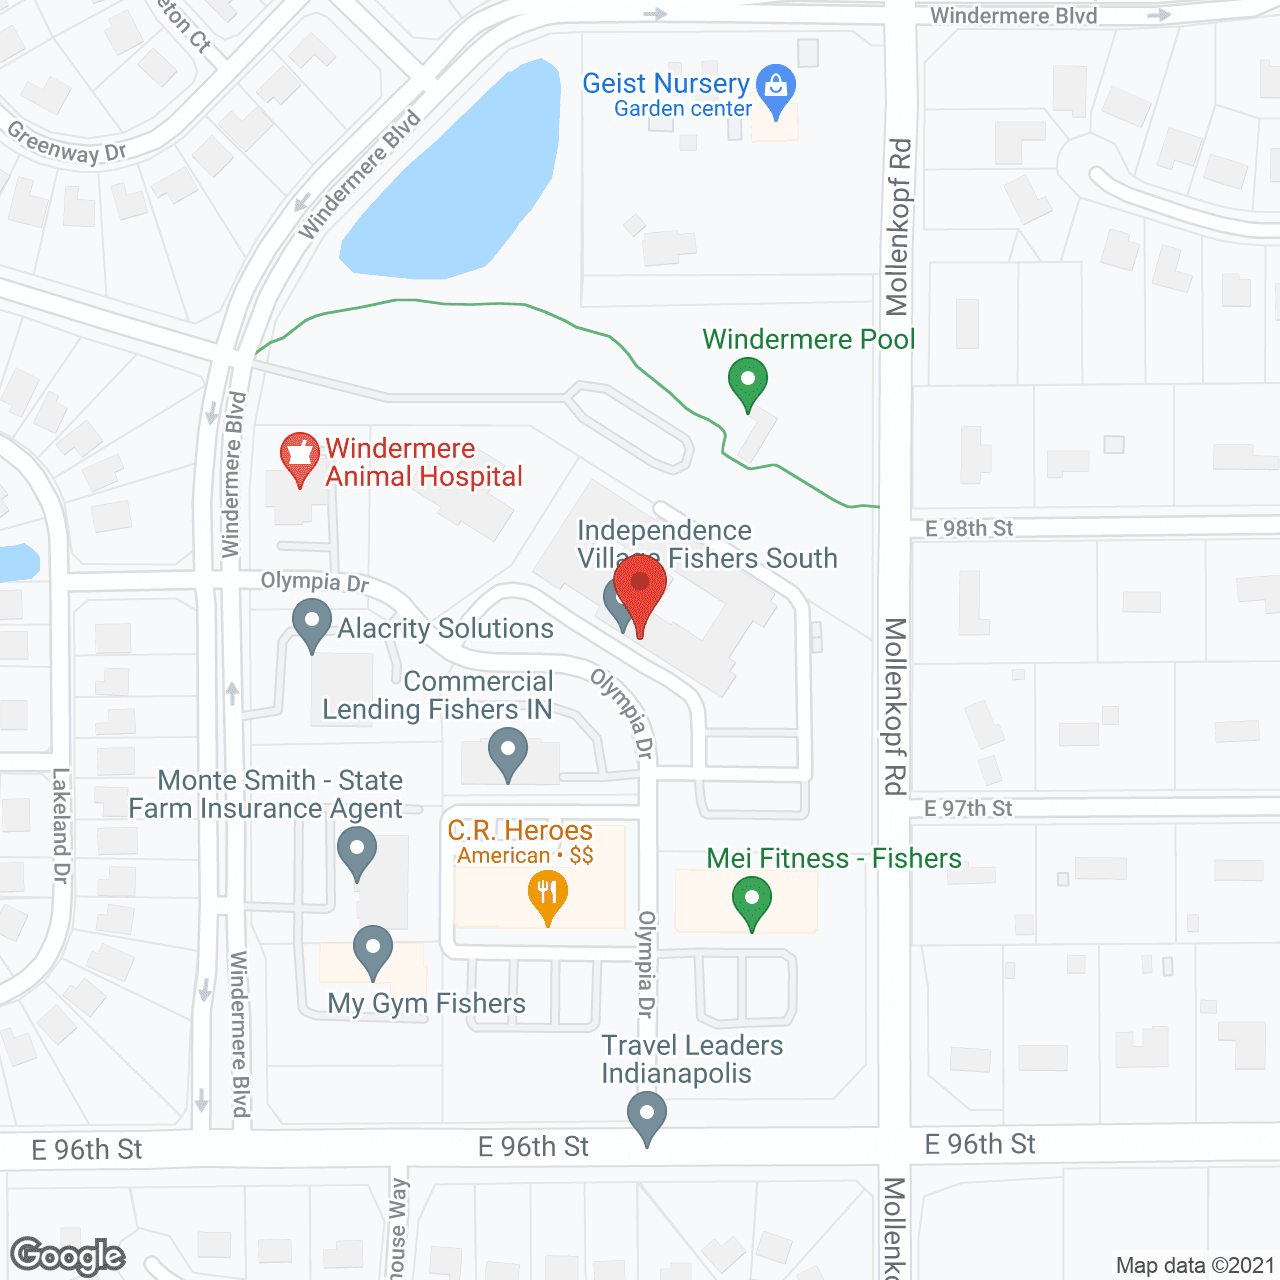 Independence Village of Fishers South in google map